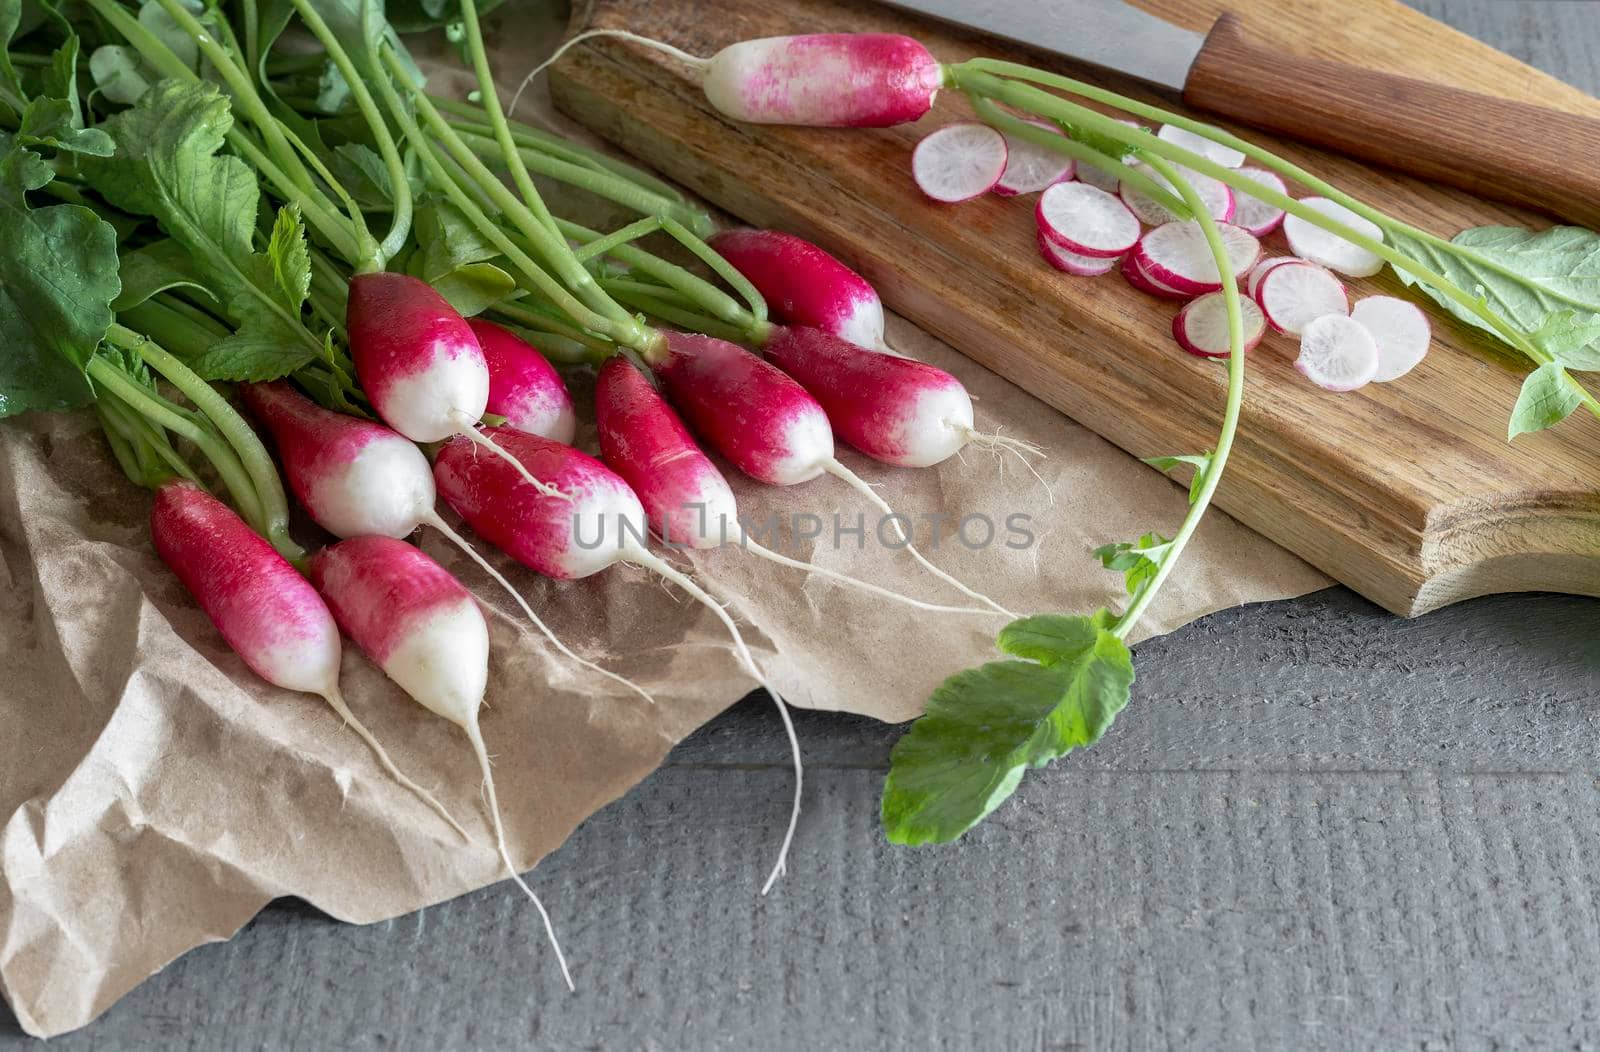 On the wooden surface of the table is a bunch of young radishes with green leaves.